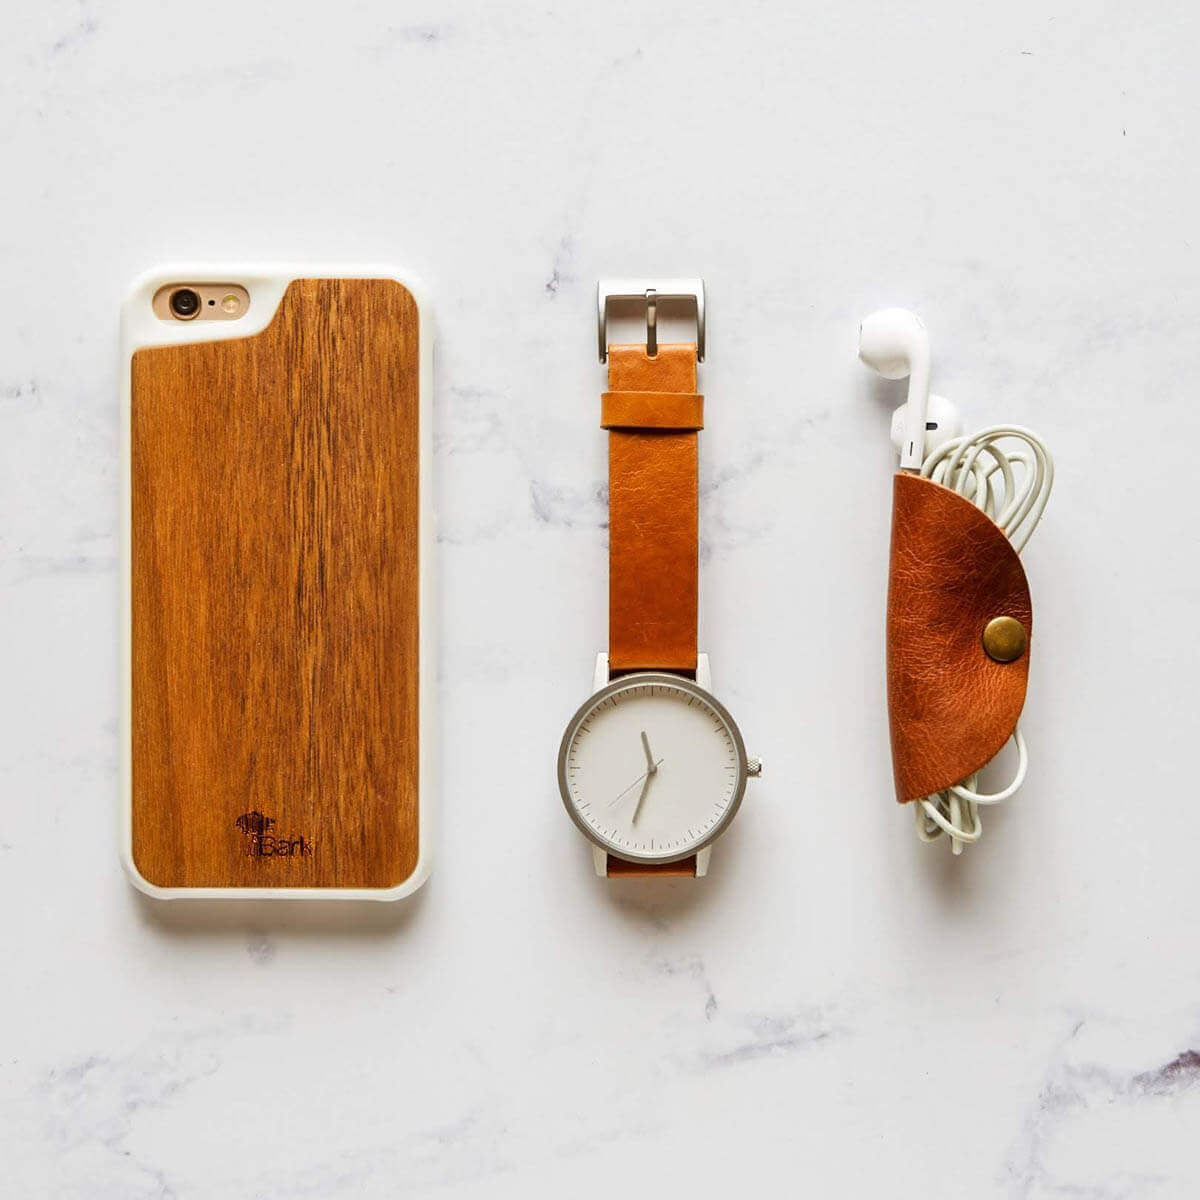 Wood products for cellphone, watch, and headphones